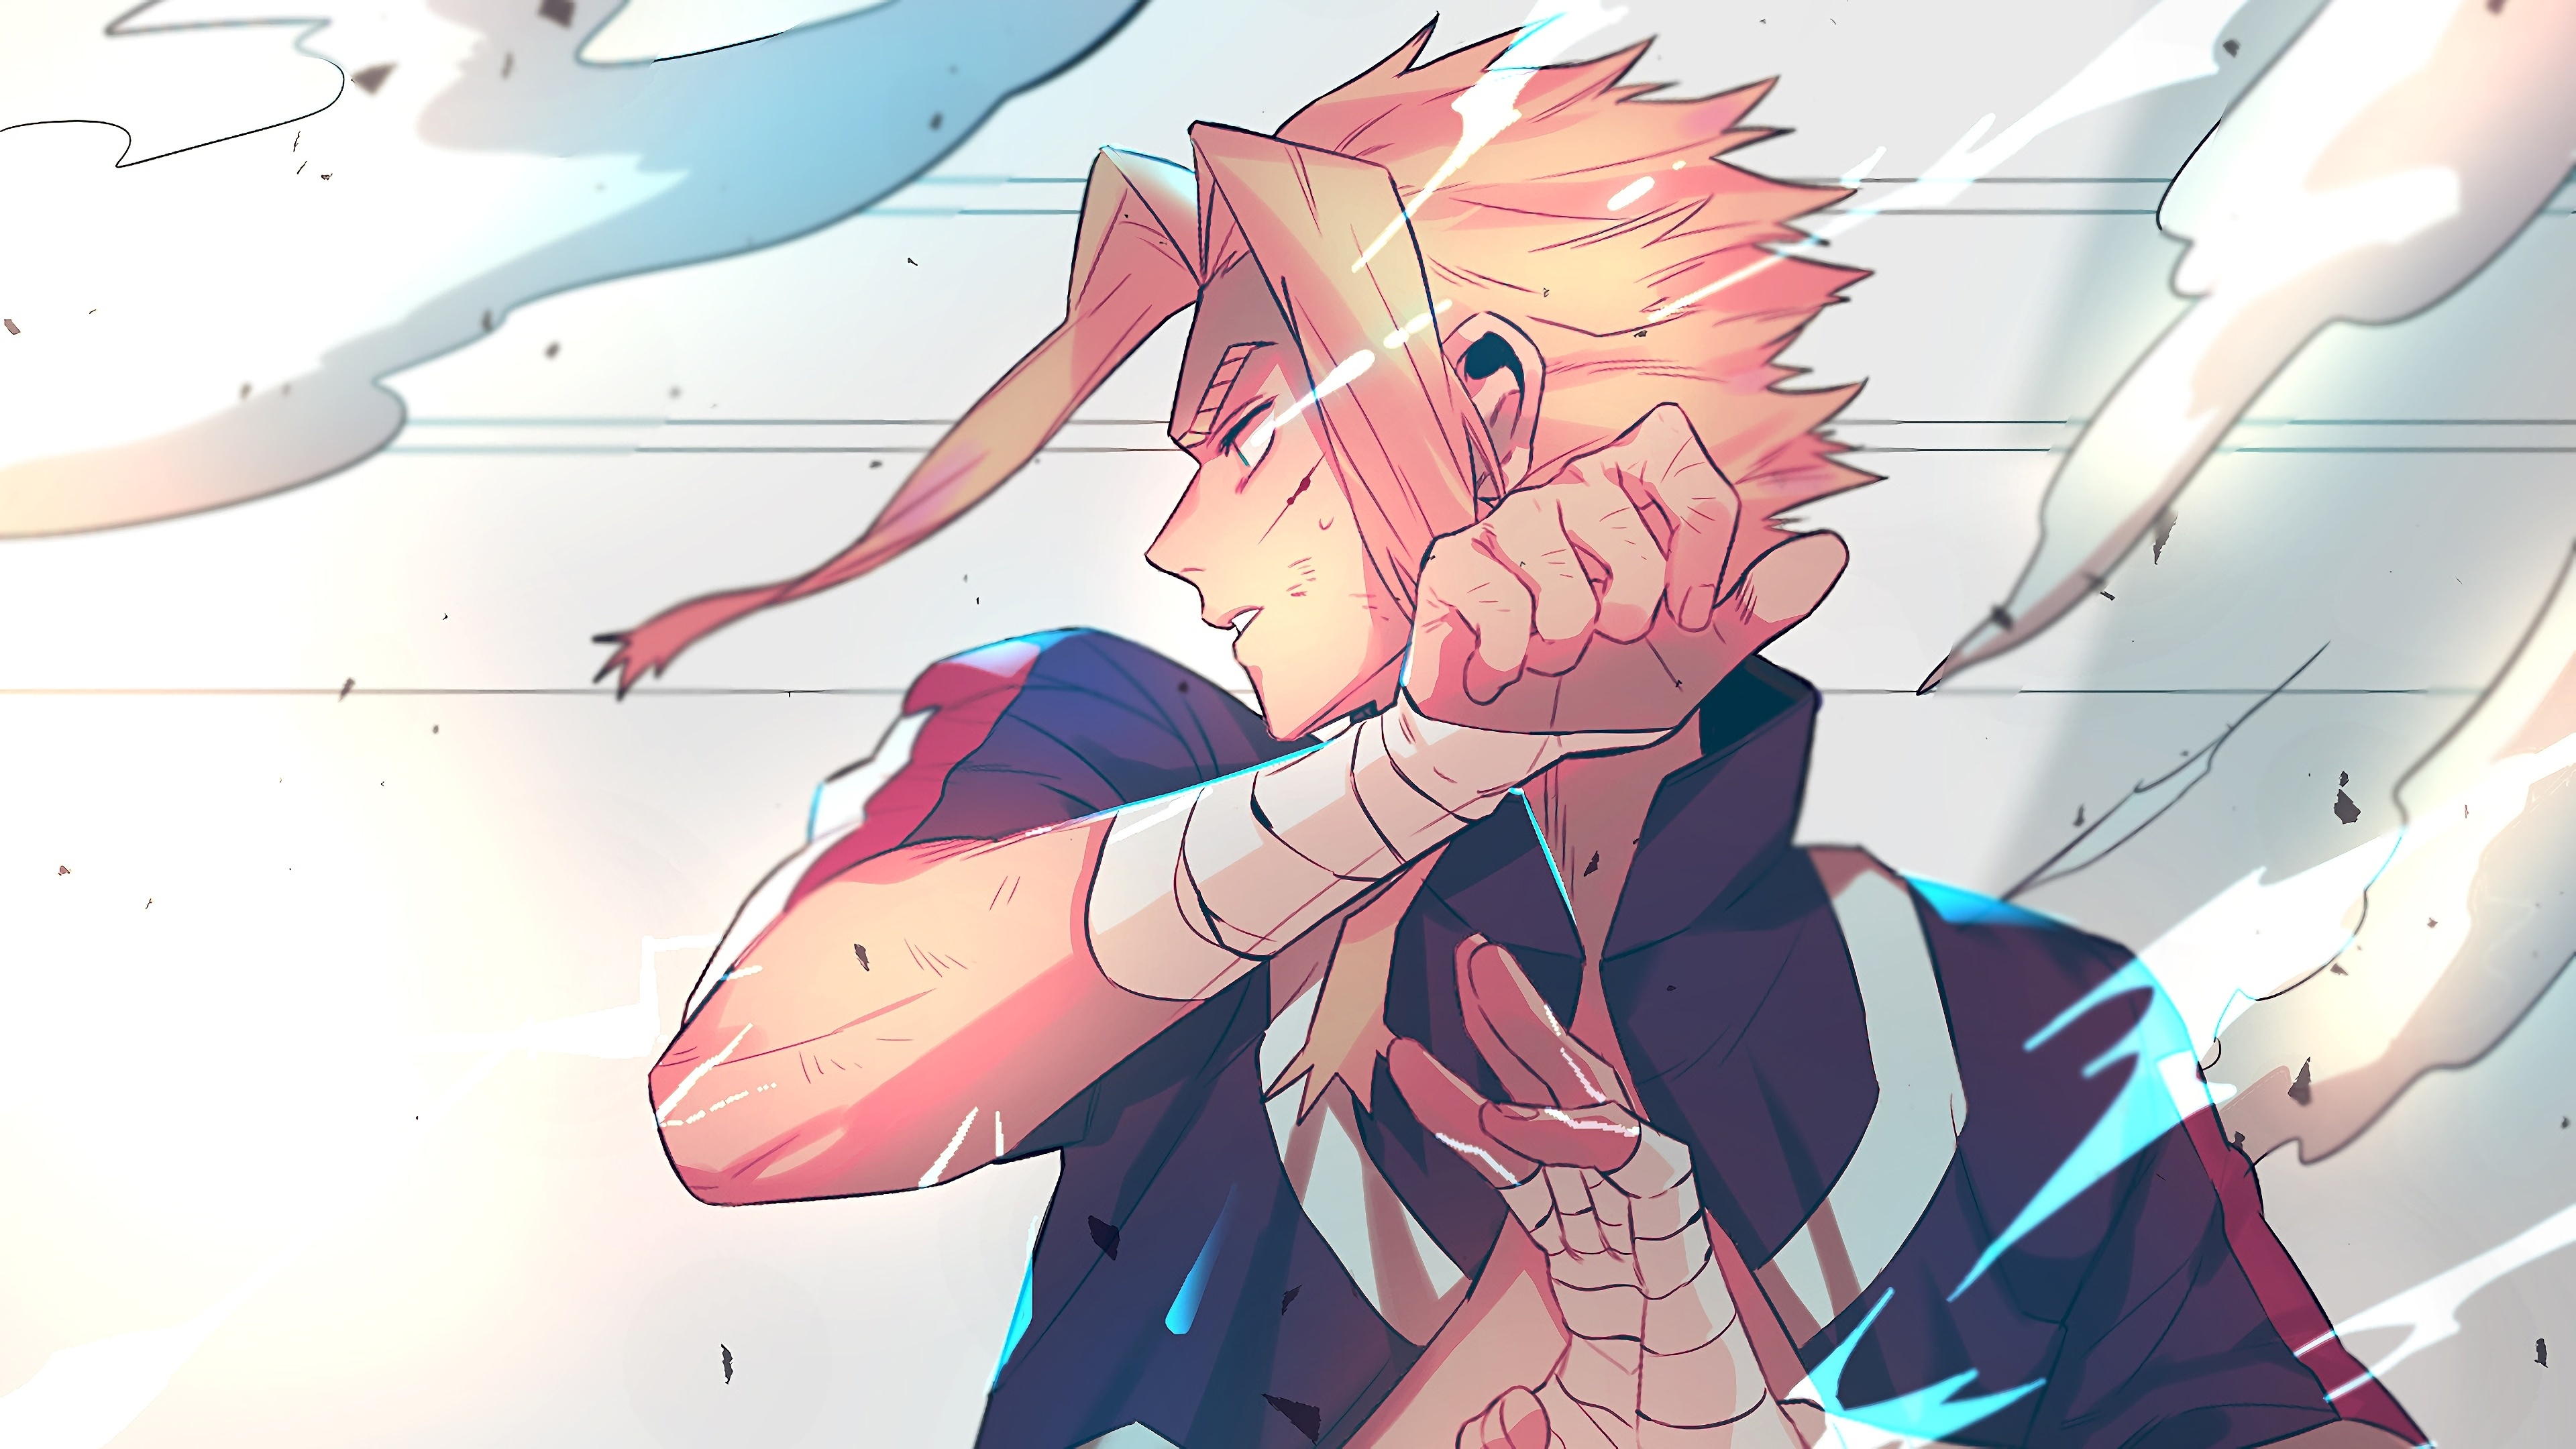 Aggregate 62+ all might wallpaper - in.cdgdbentre